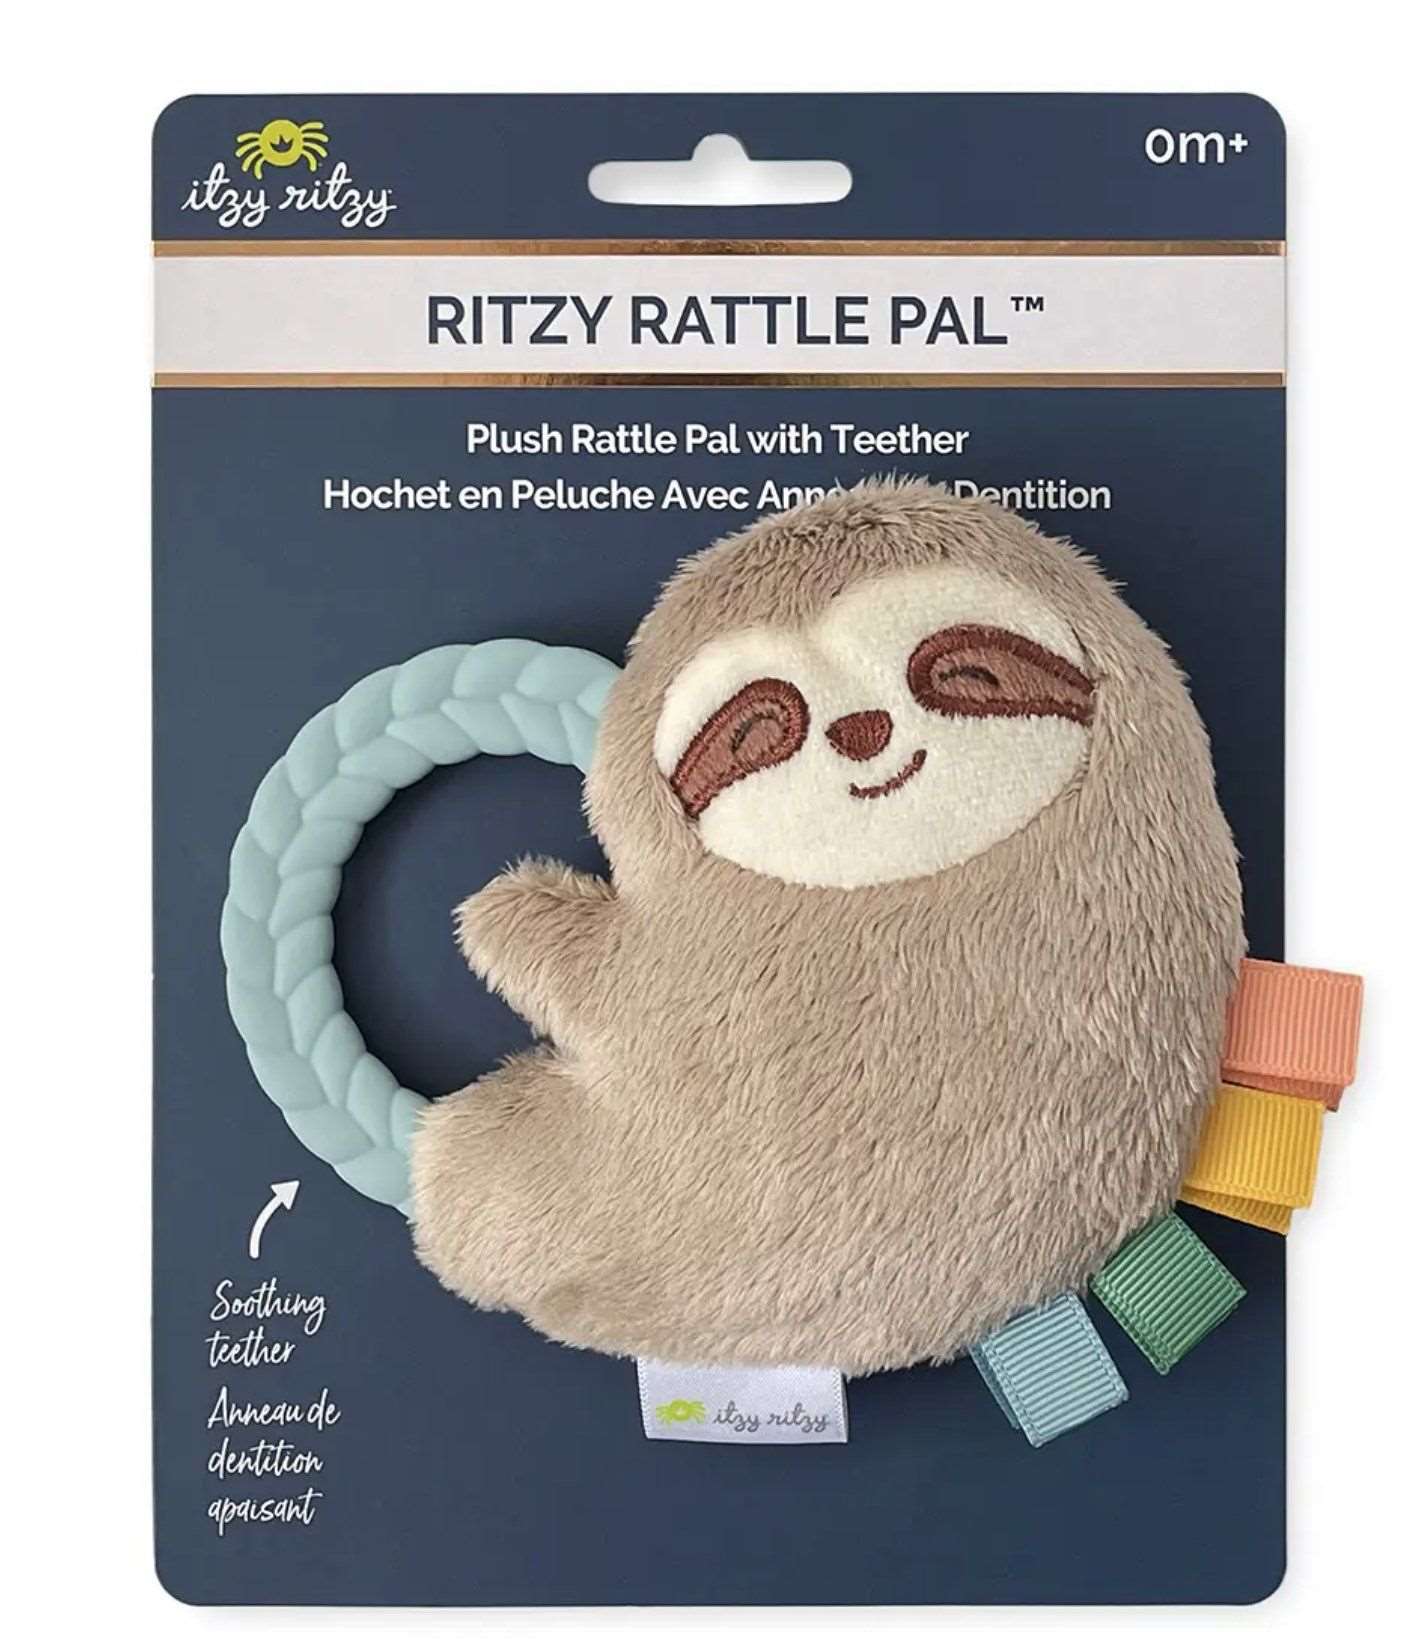 NEW Ritzy Rattle Pal™ Plush Rattle Pal with Teether Baby in Styles